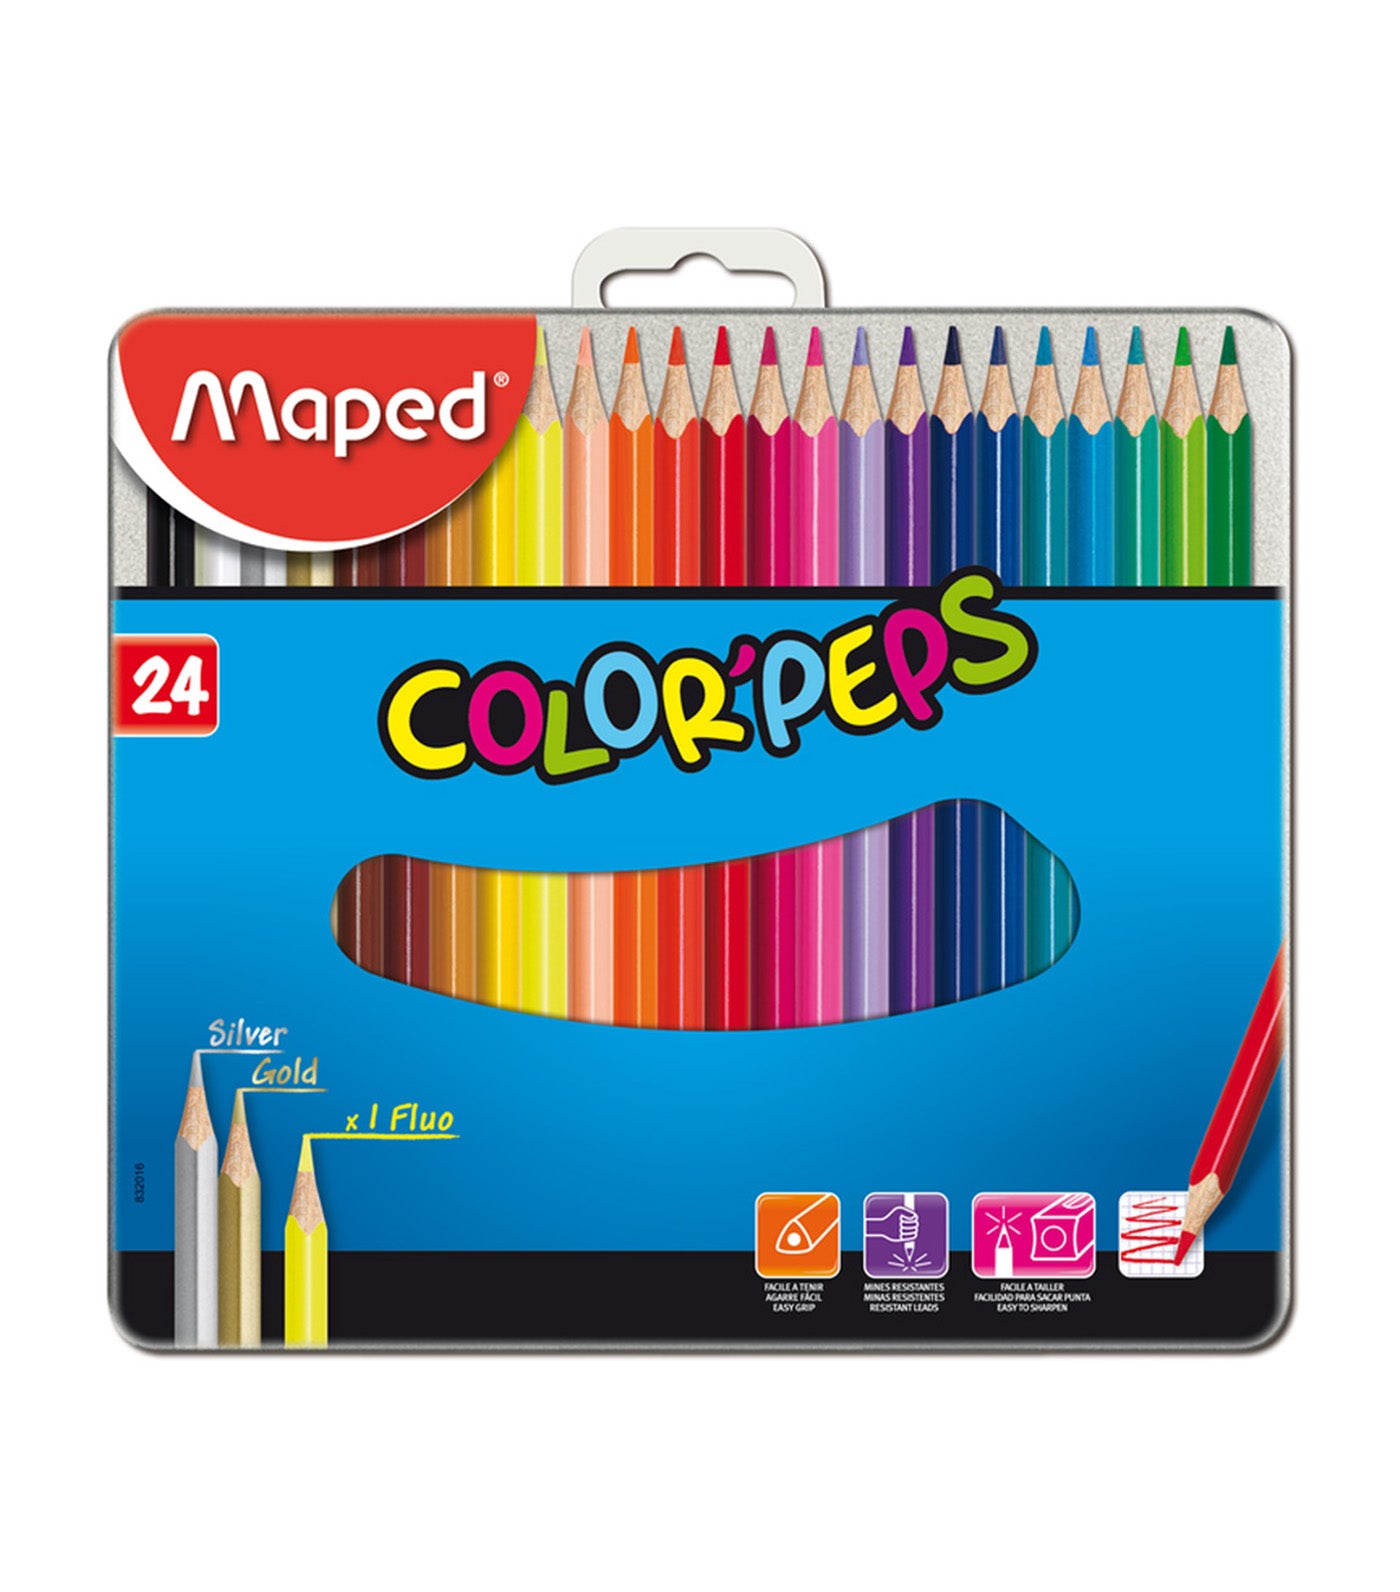 Maped Color'Peps Colored Pencils - Class Pack of 240, BLICK Art Materials